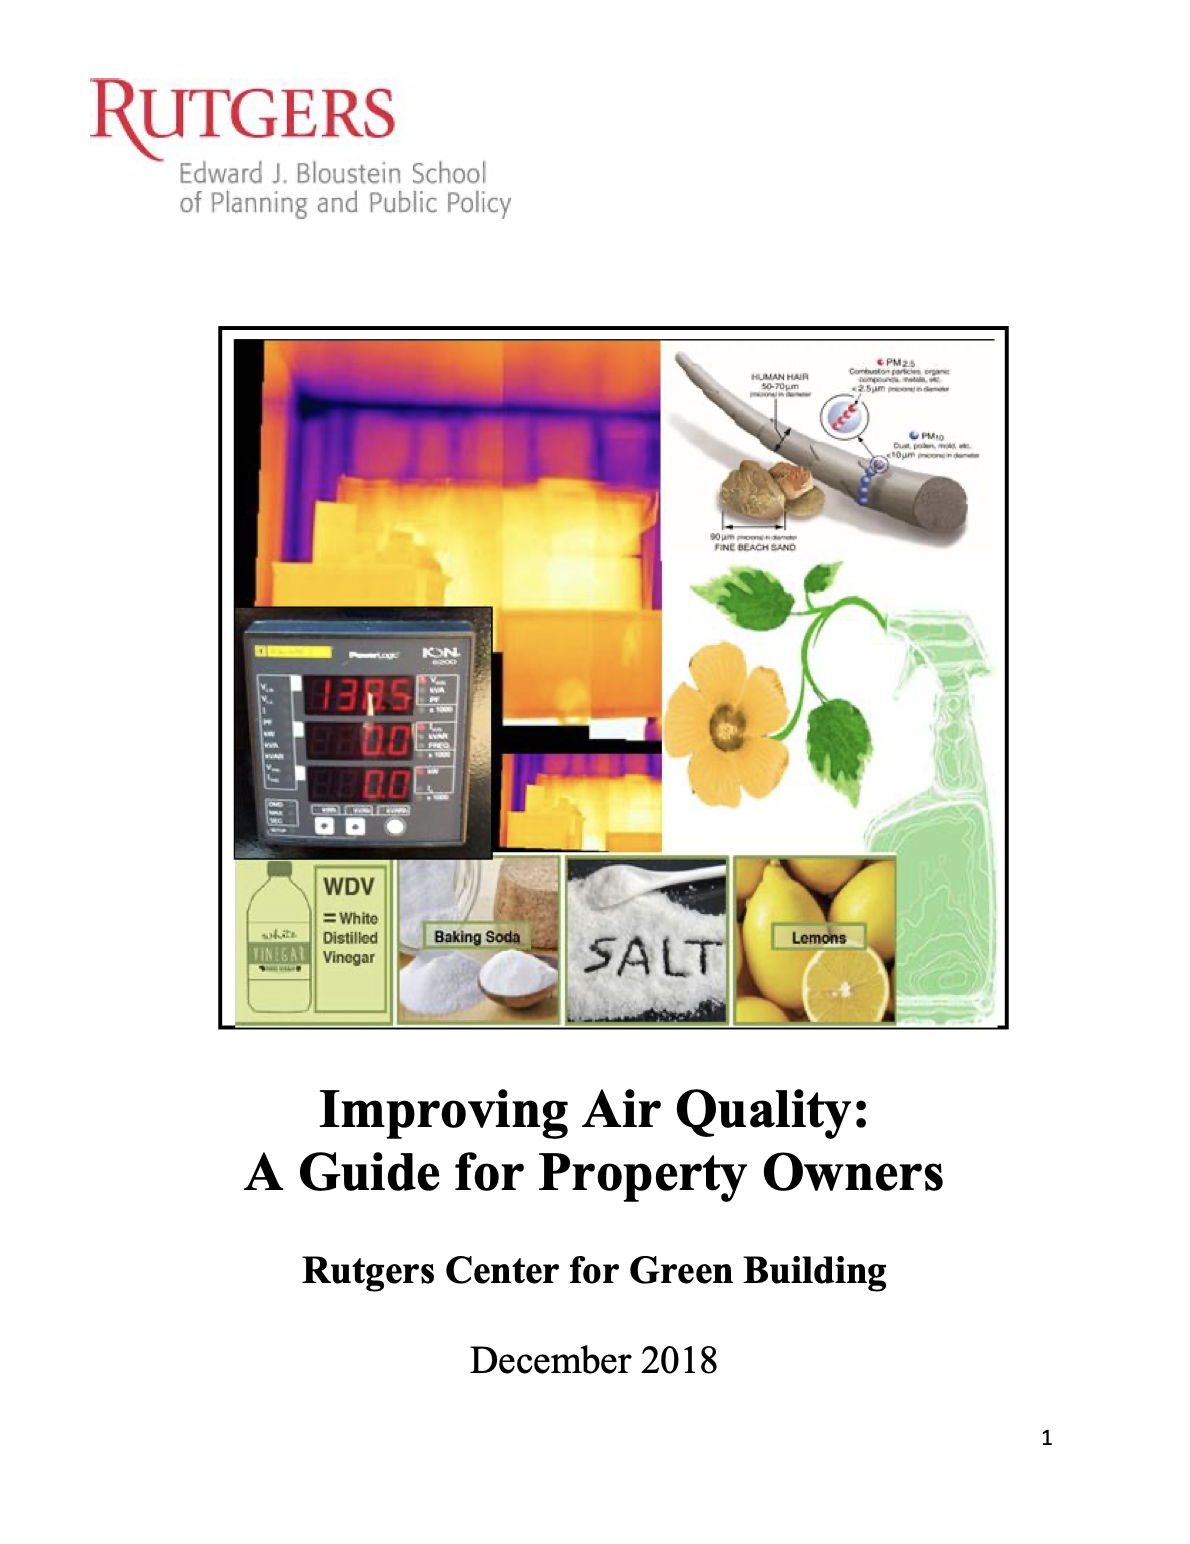 Improving Air Quality A Guide for Property Owners